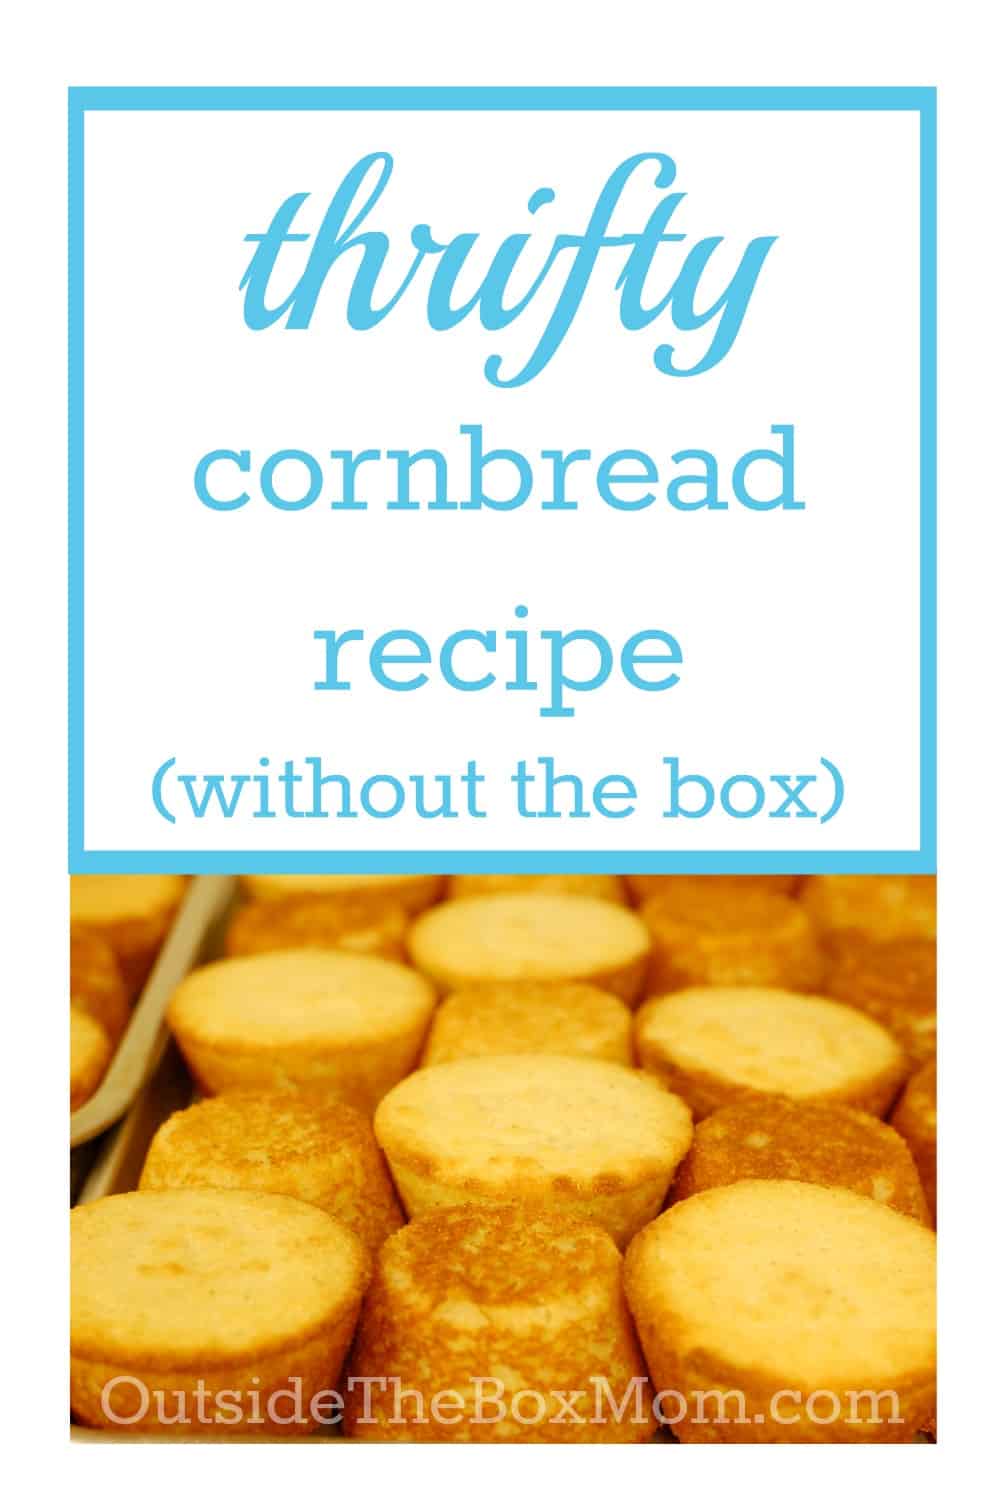 Looking for an easy, thrifty cornbread recipe that's better than the box?  | OutsideTheBoxMom.com